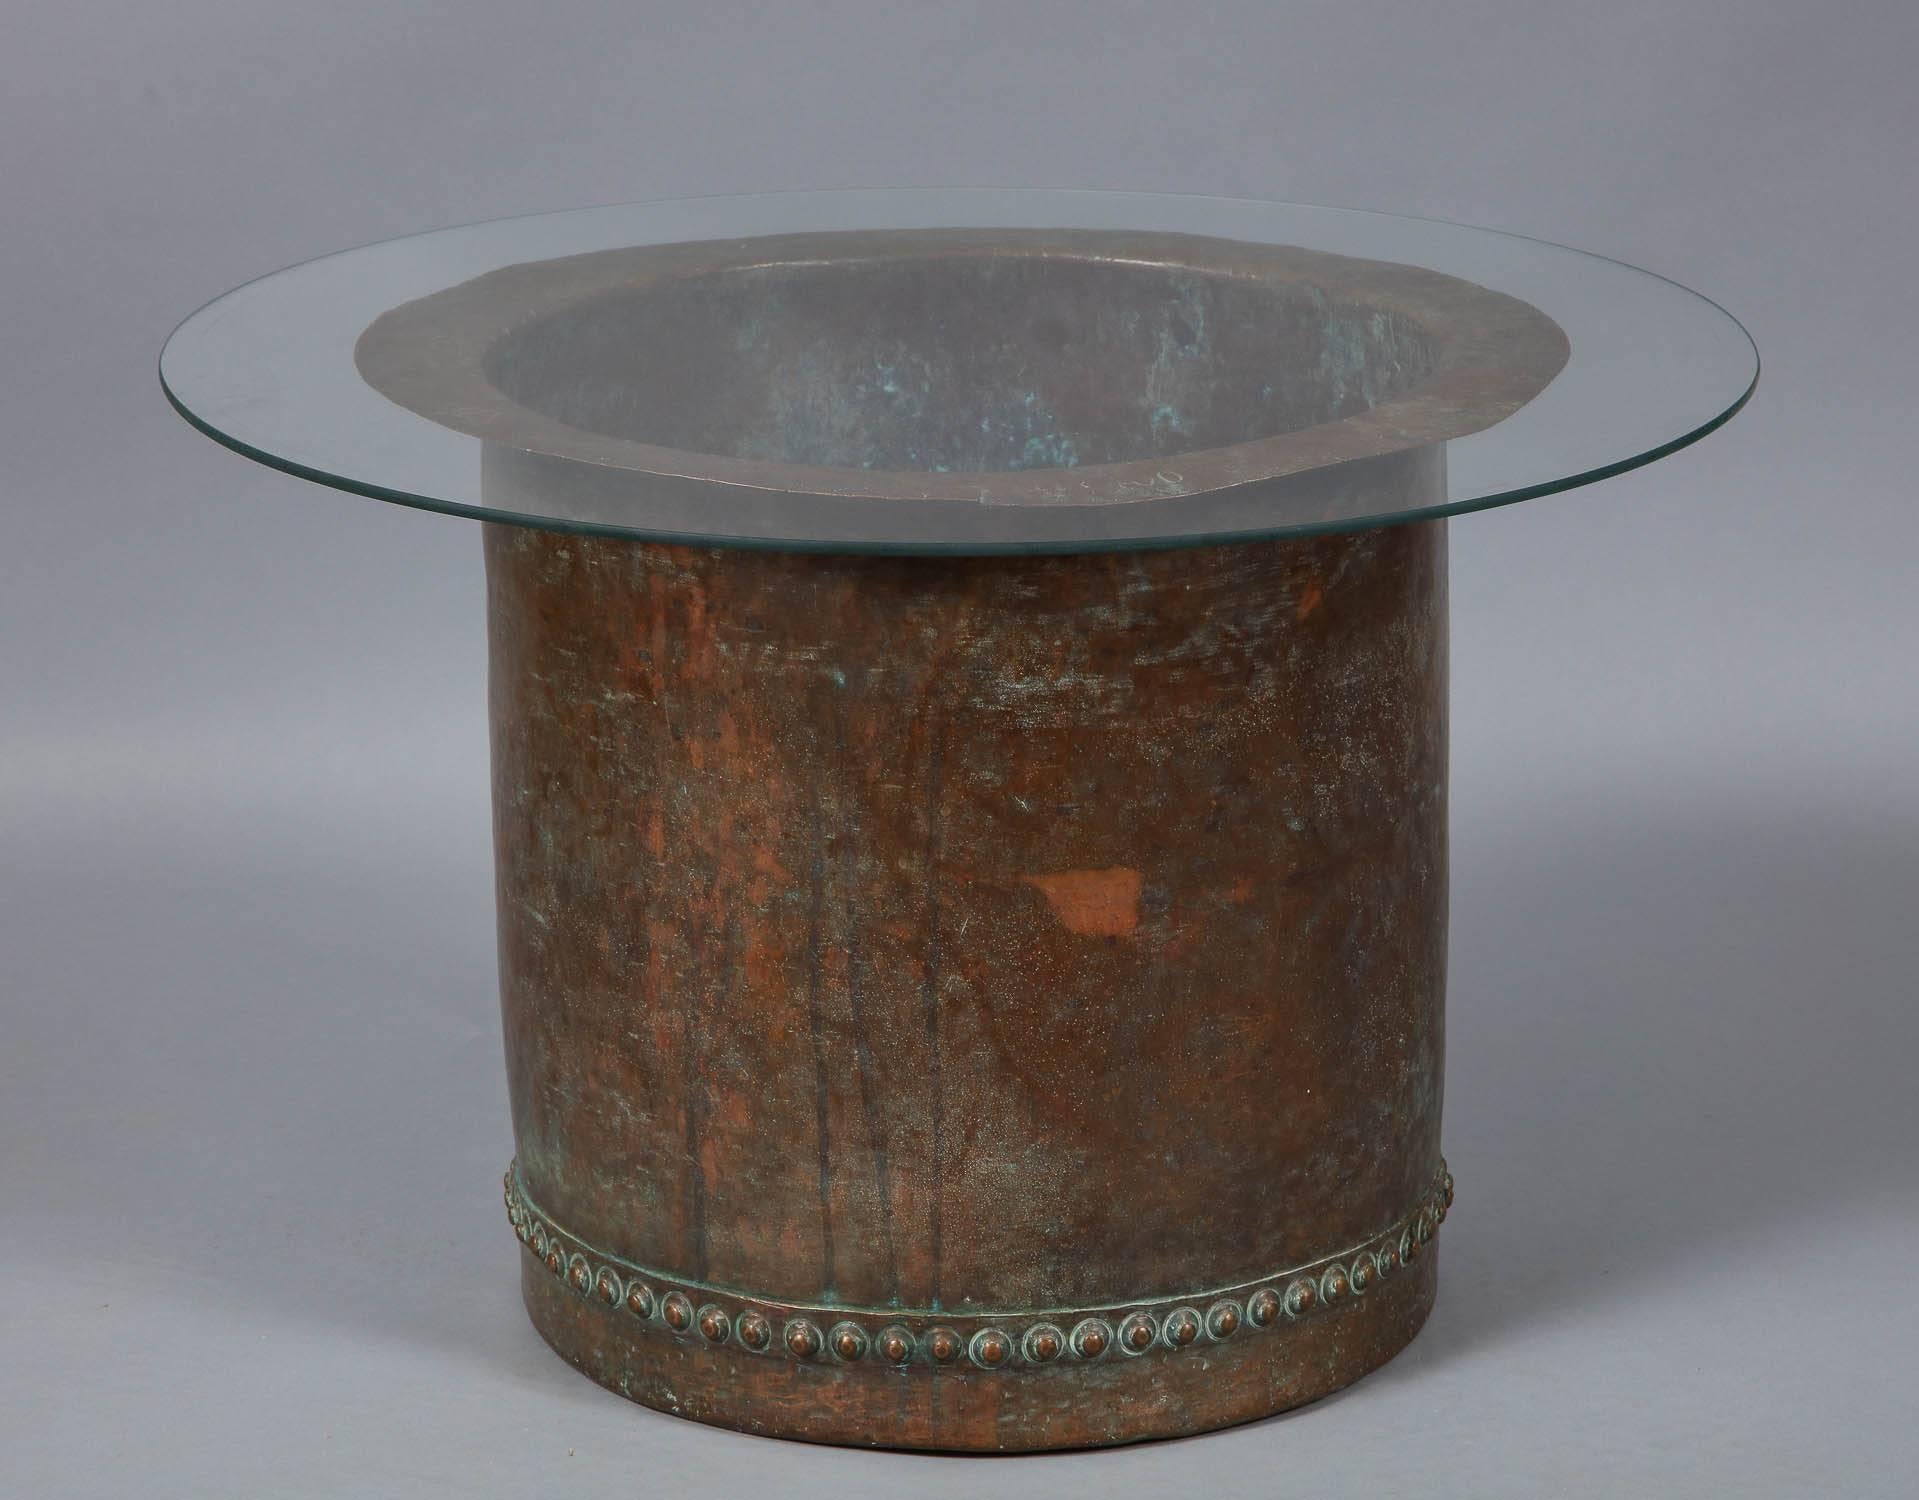 A fantastic riveted copper oversize log bin having beautiful bronzed patina, and top-hat form, as coffee table with glass top. Measure: 18